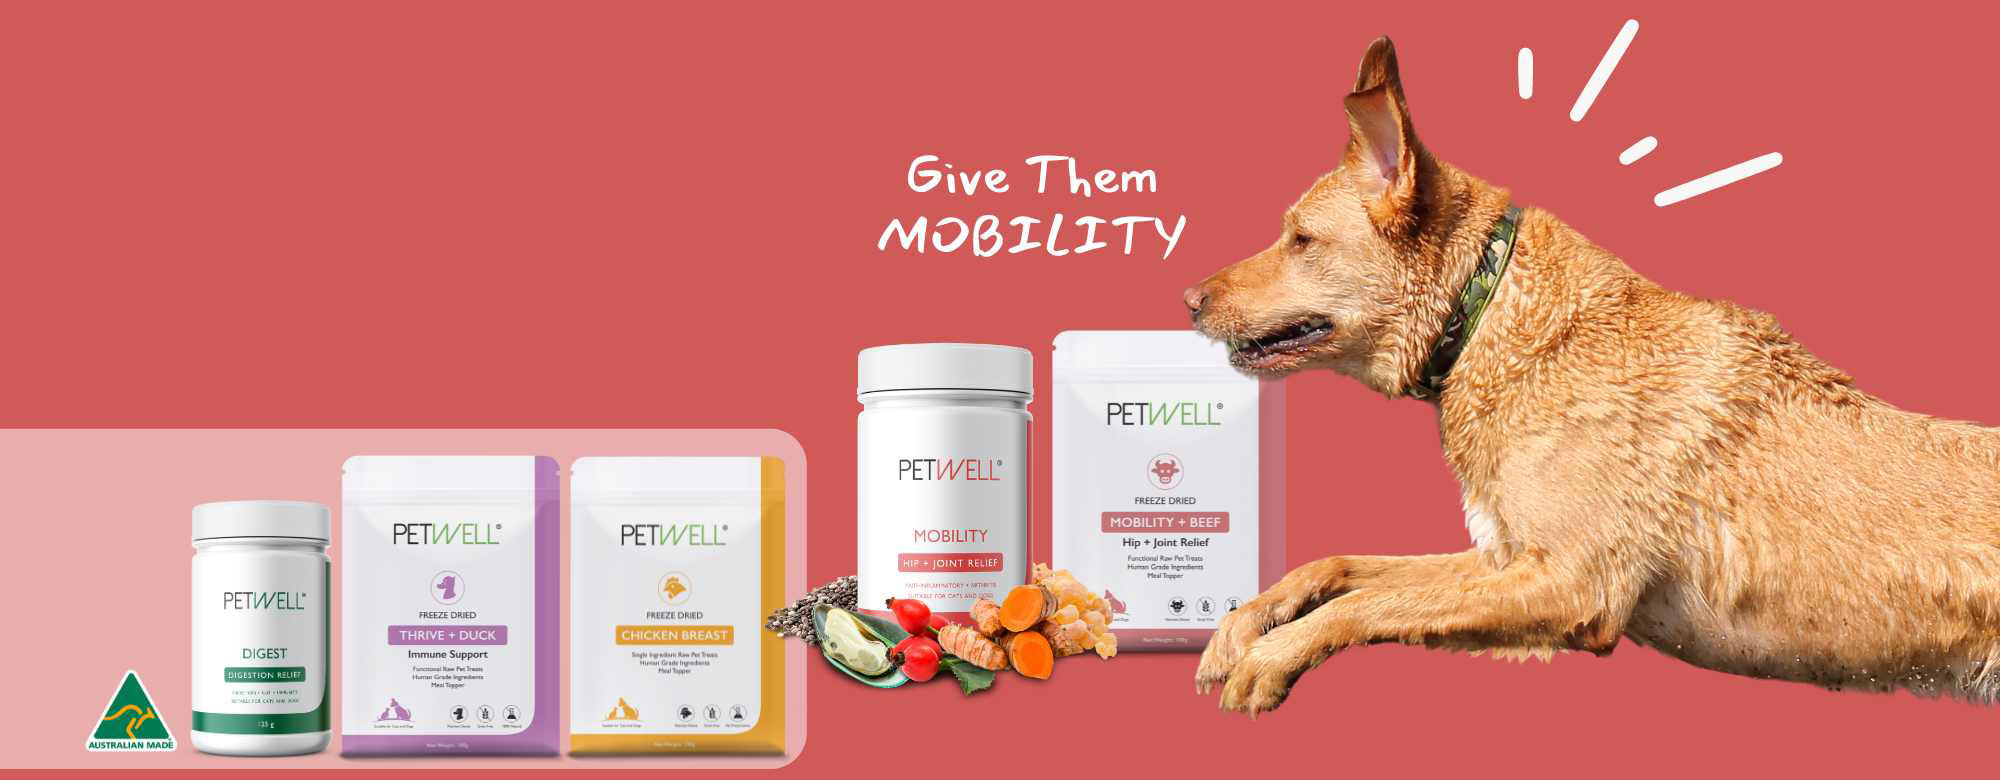 PetWell MOBILITY Banner